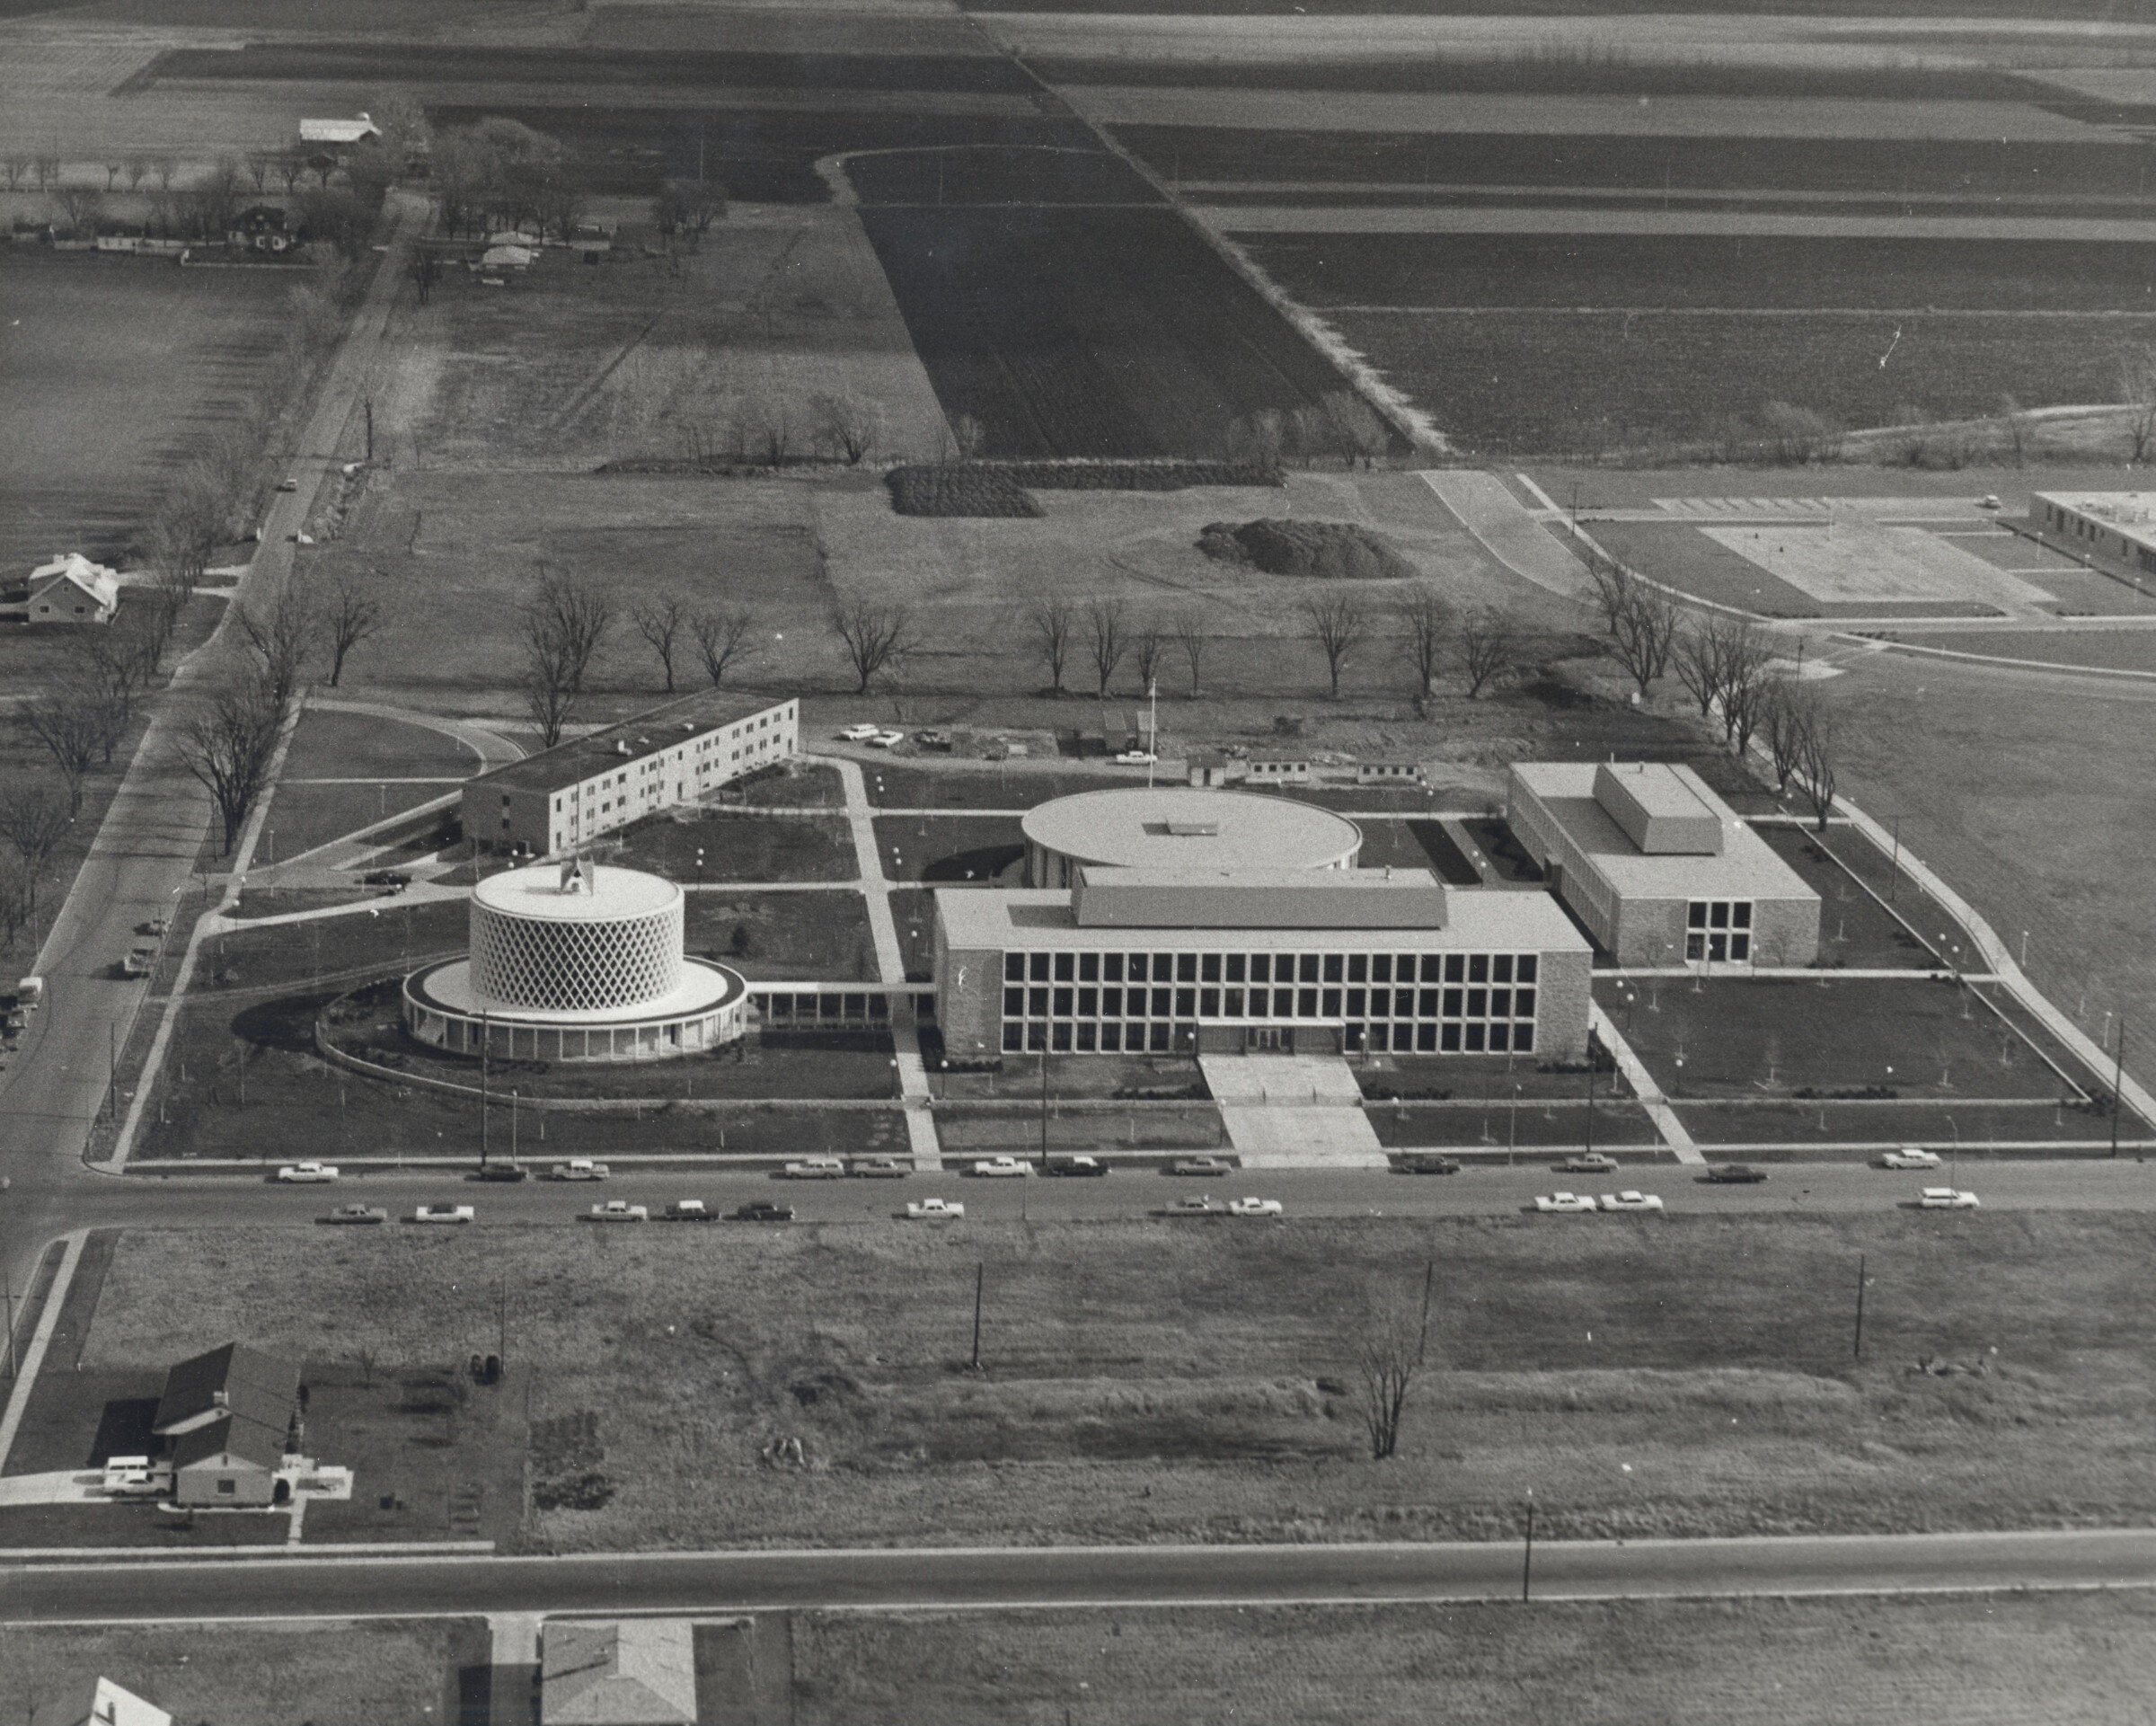 Aerial view of the Marian College campus, 1960s.